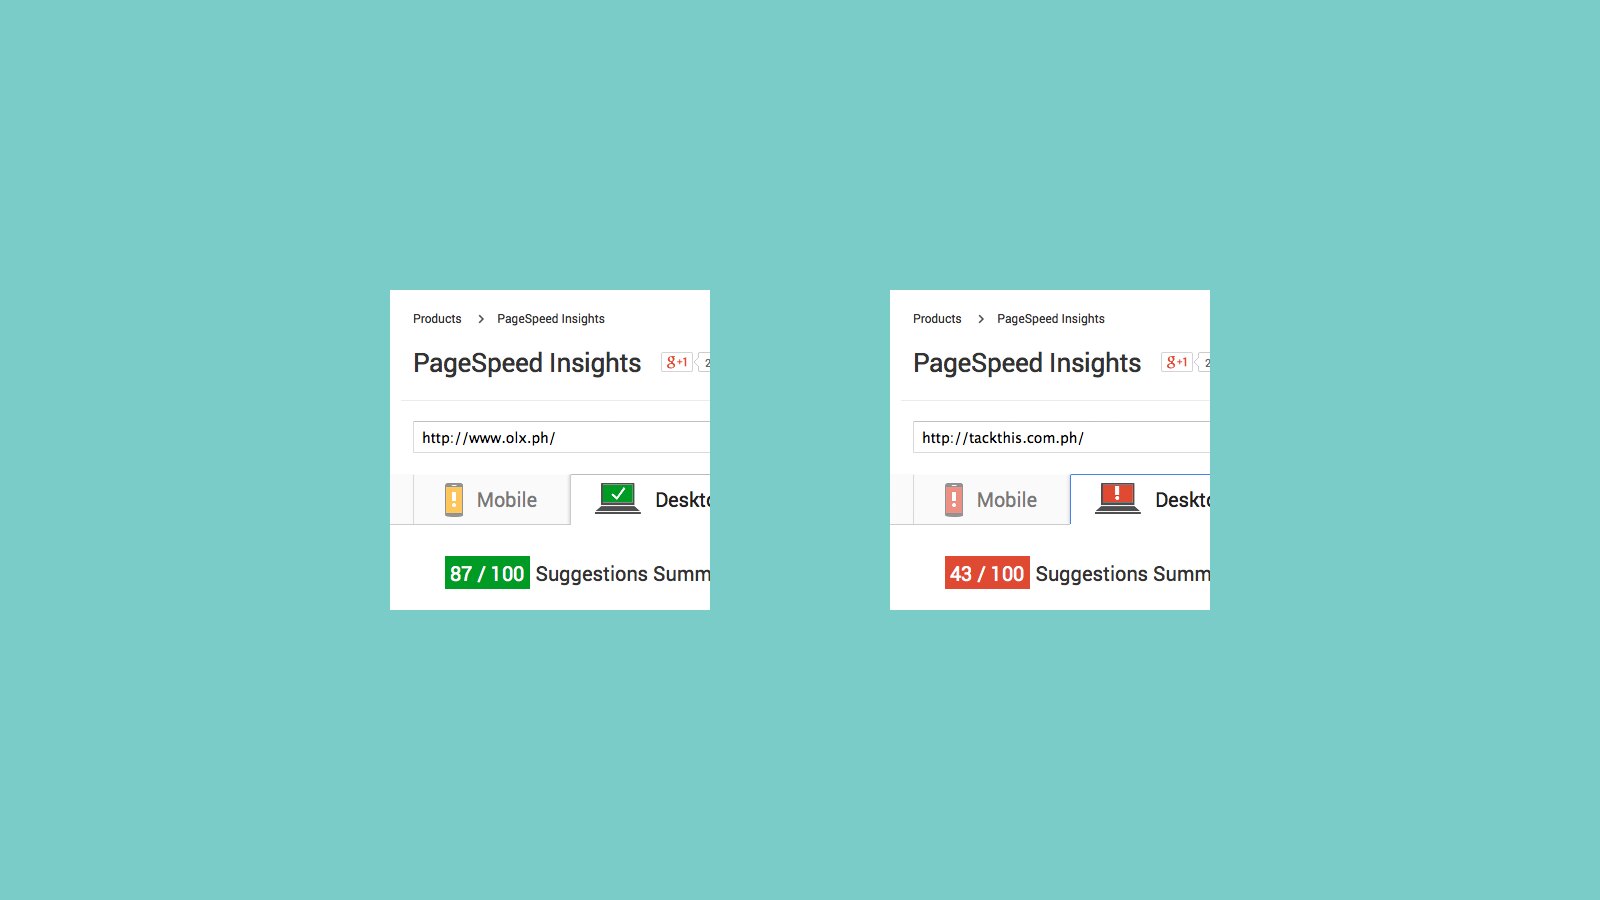 Comparison: PageSpeed